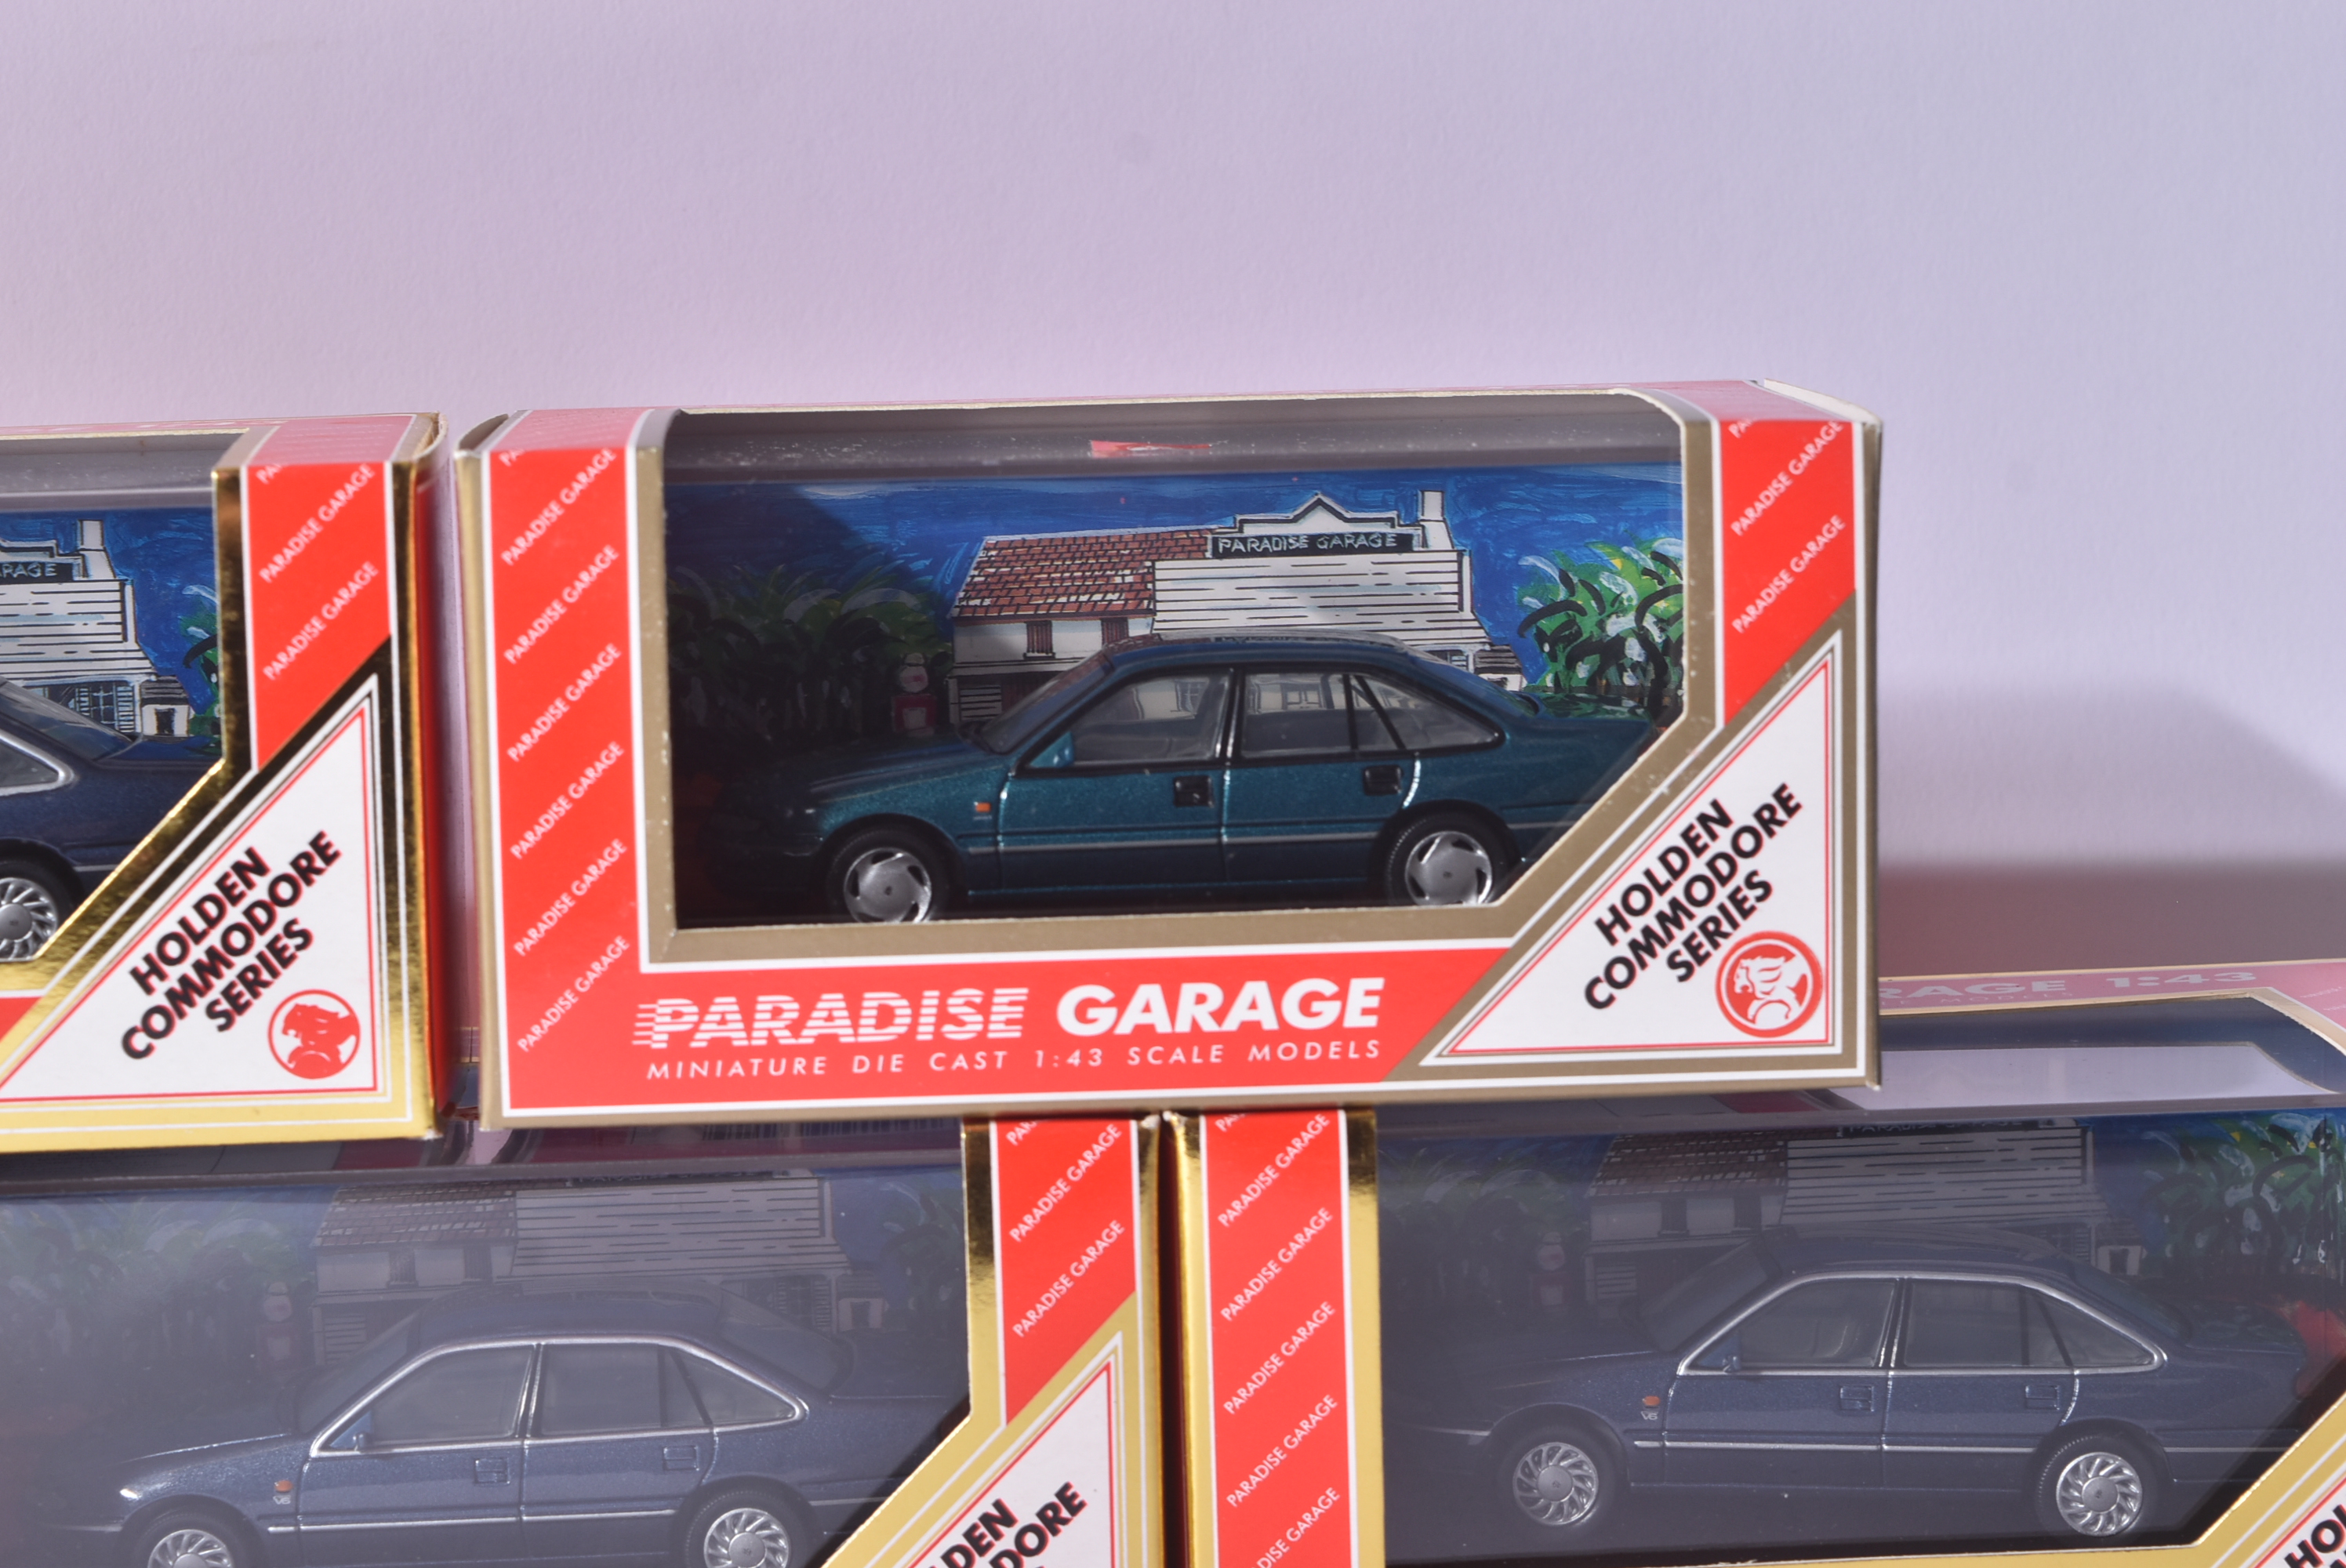 PARADISE GARAGE - 1/43 SCALE PRECISION DIECAST MODELS - Image 5 of 6